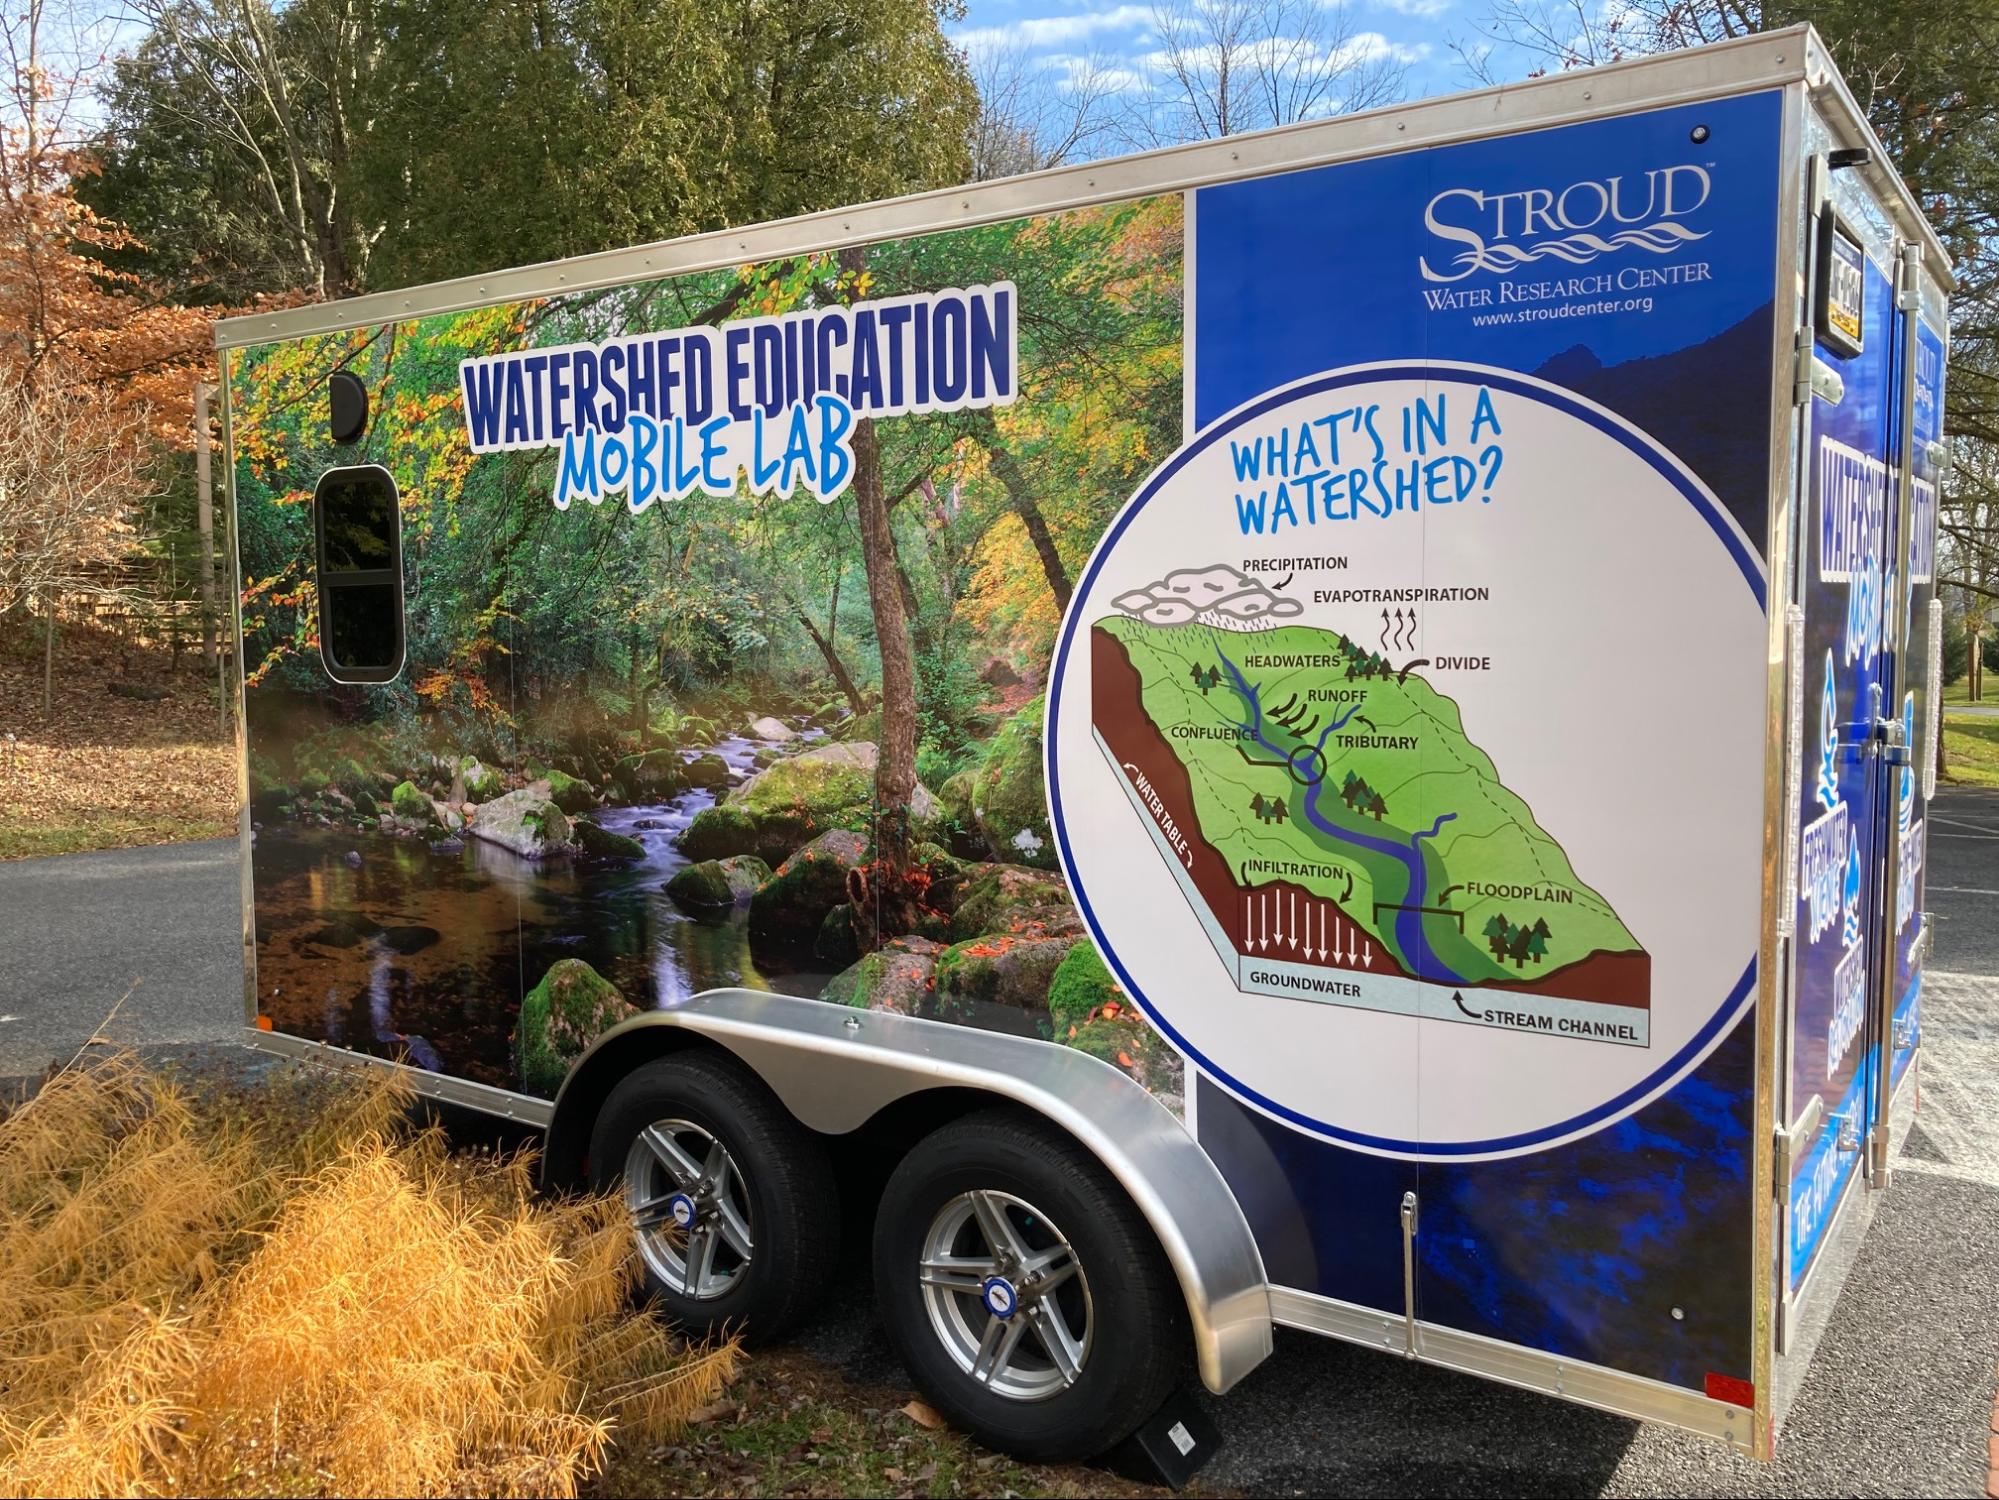 Stroud Water Research Center's Watershed Education Mobile Lab